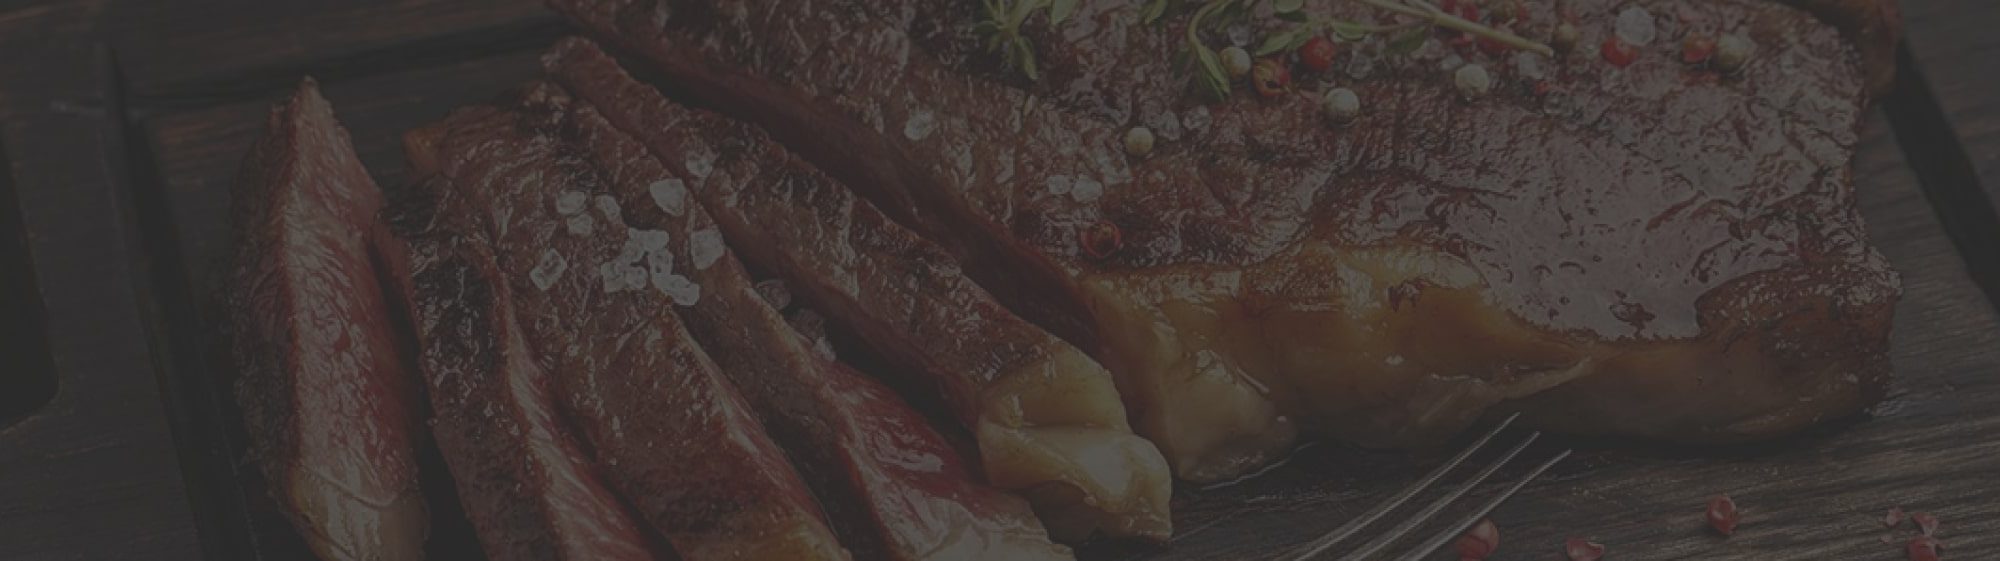 meat4you-header